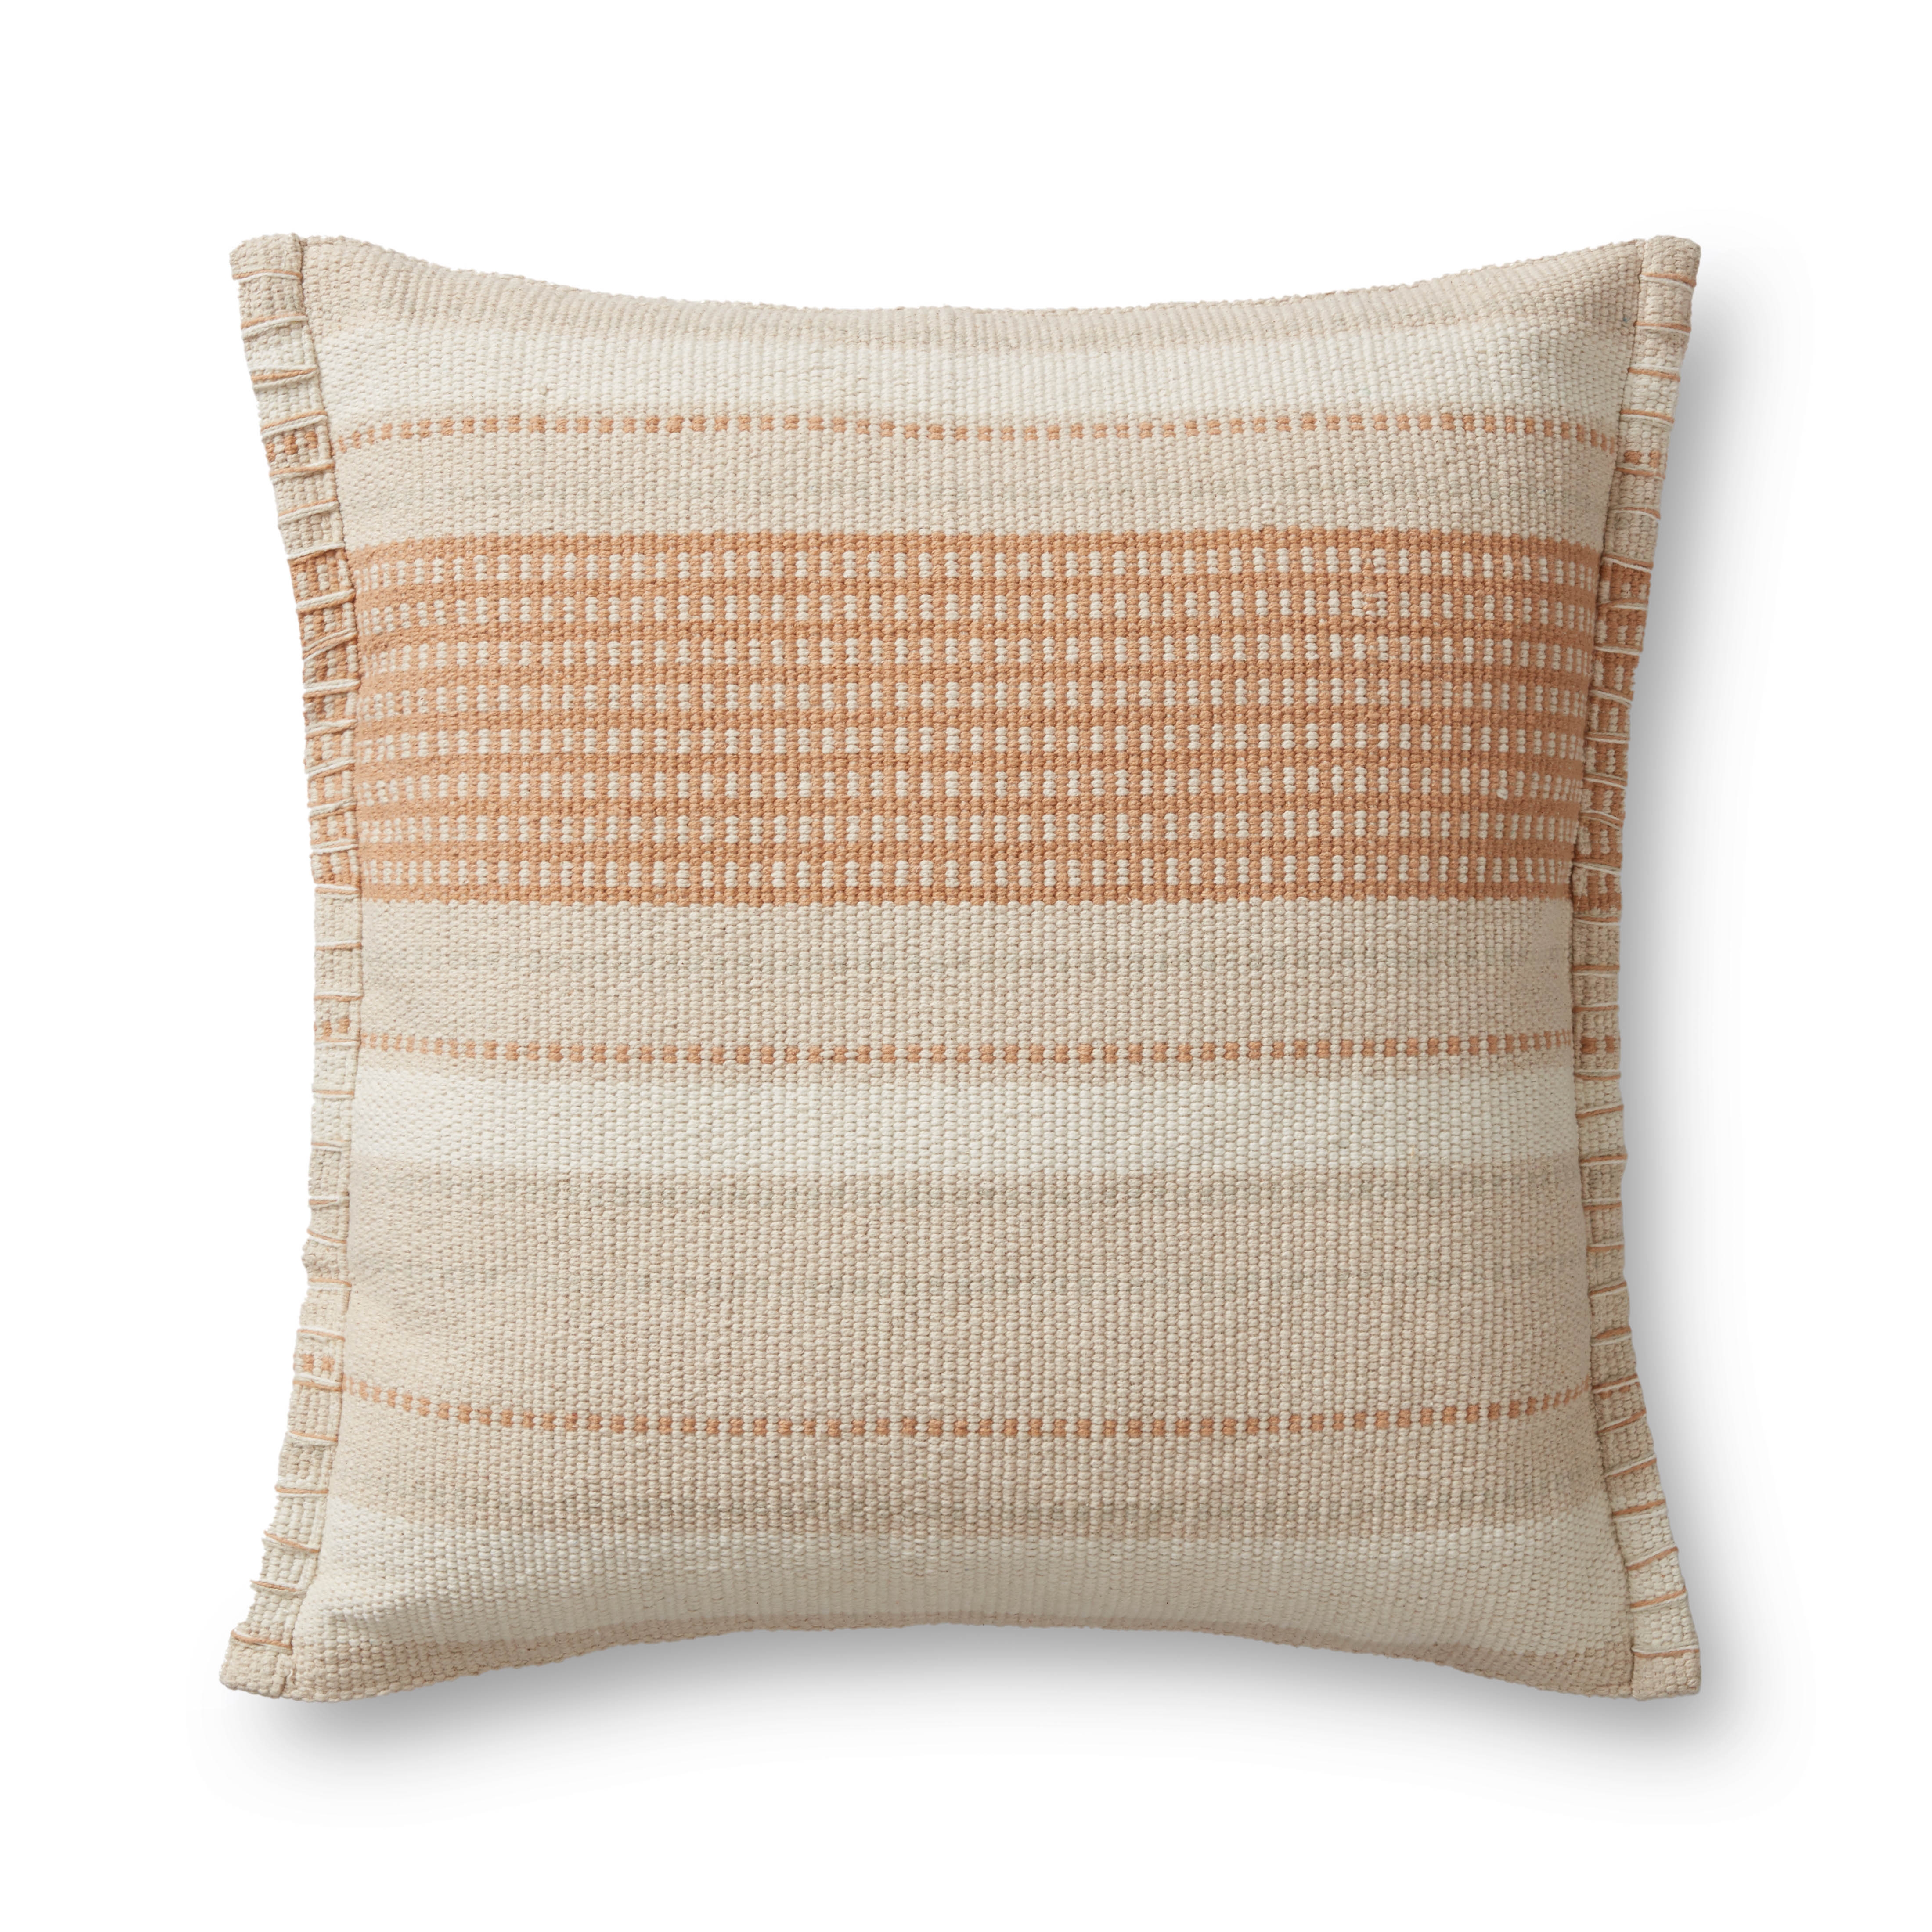 PILLOWS P1176 BEIGE / MULTI 22" x 22" Cover w/Poly - Image 0